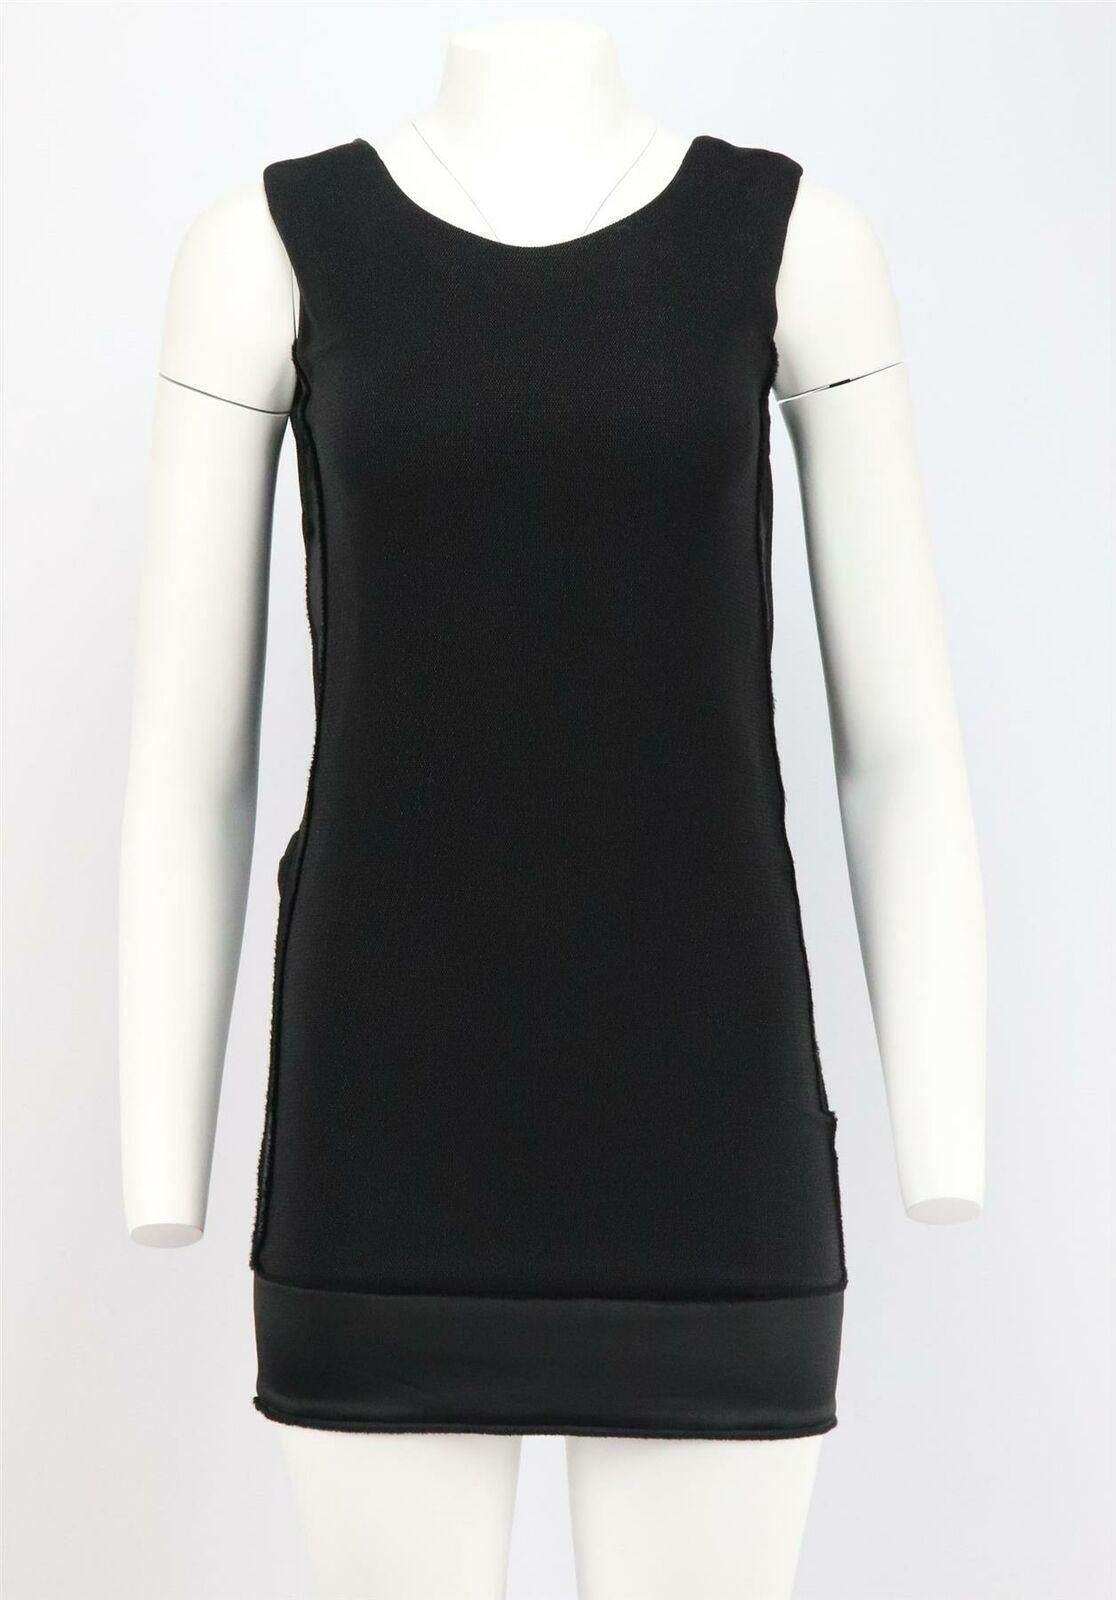 This dress by Jay Ahr is made from textured woven fabric - it fits closely to the body and is designed in a mini silhouette that fall above the knee and has draped open back.
Black viscose-blend.
Concealed zip fastening at side.
97% Viscose, 2%